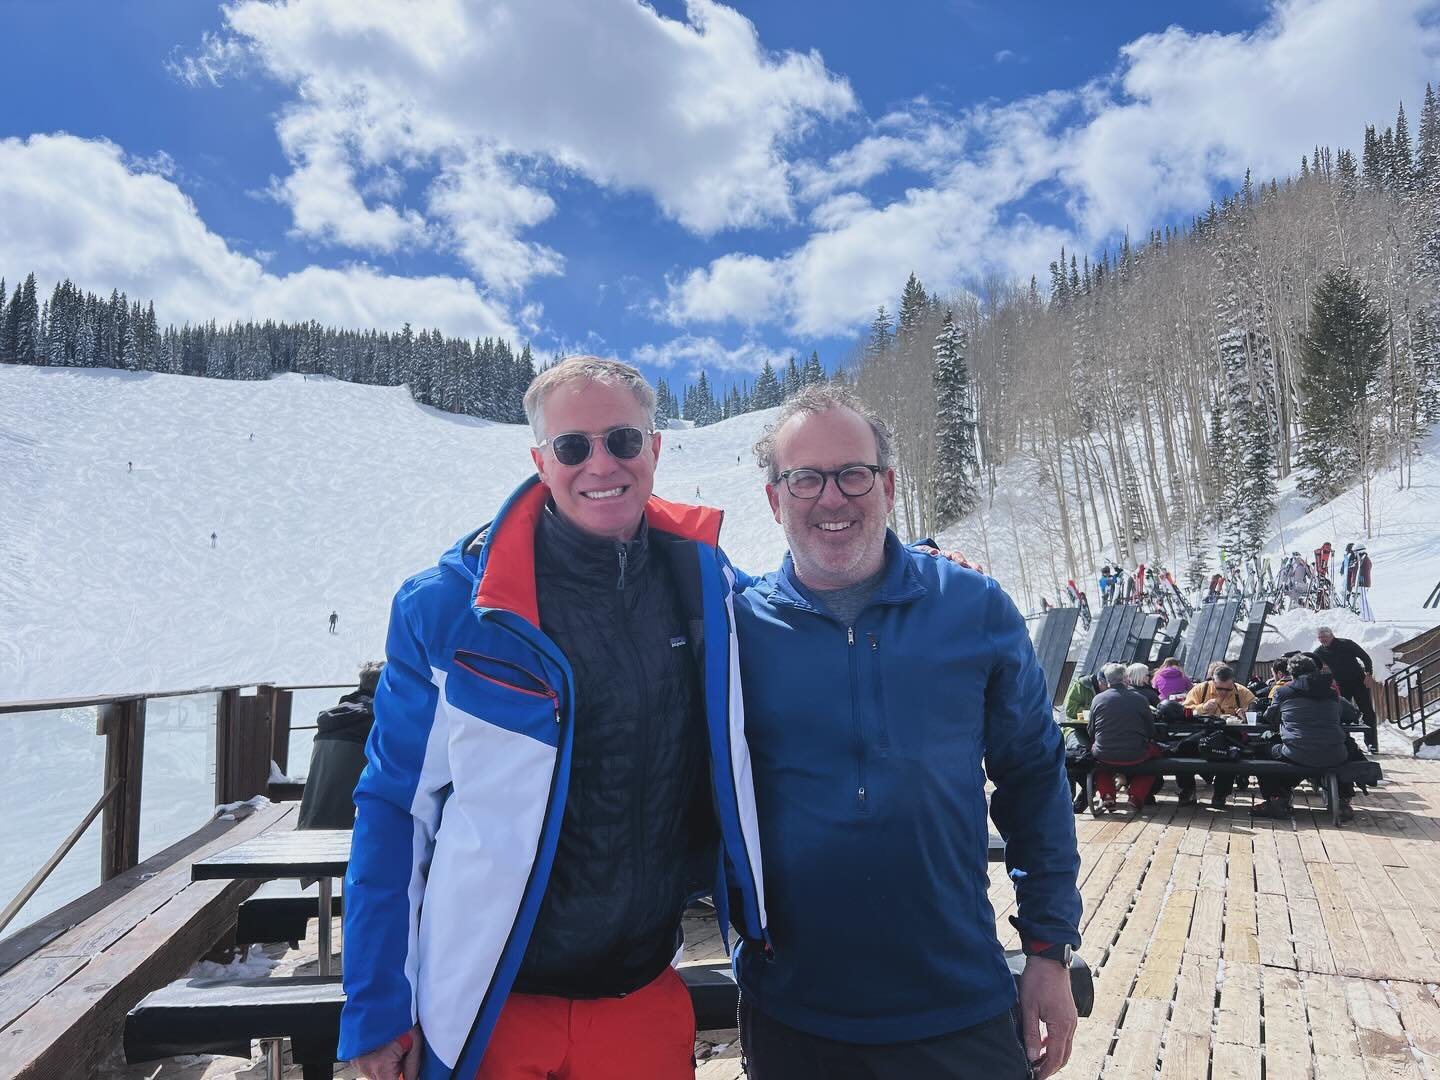 Epic day of skiing with @cliffsirlin2020 on #Ajax. Once we&rsquo;ve fulfilled our @startupwestport mission, I think Cliff would kill it as a mountain guide.